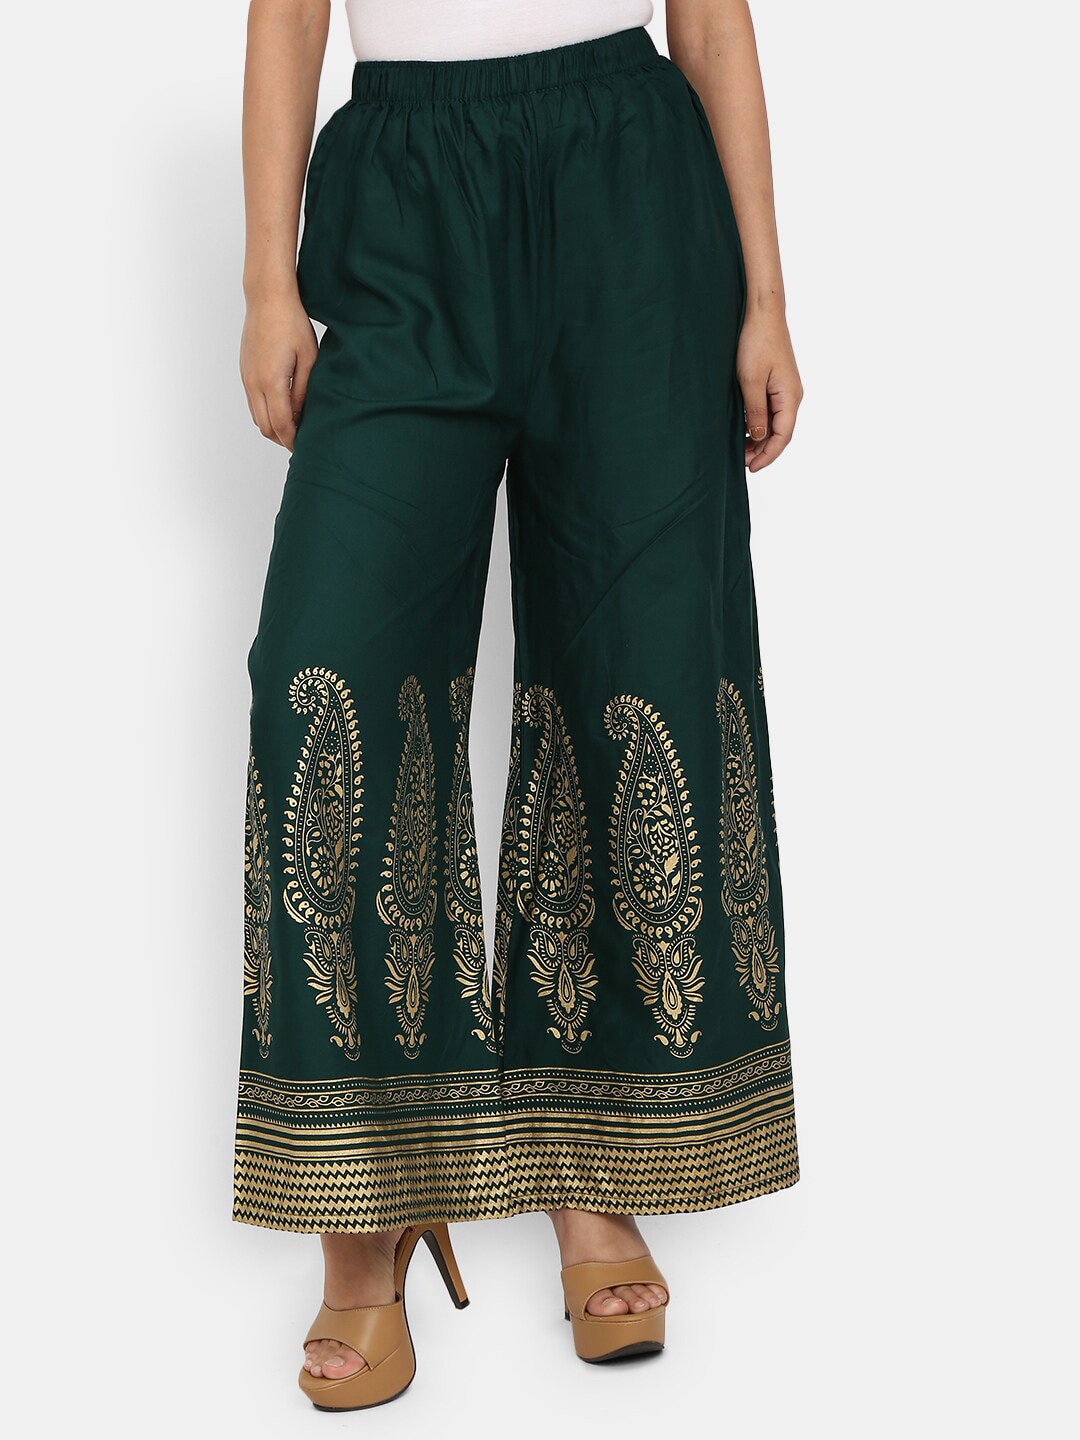 V-Mart Women Green & Gold-Toned Paisley Printed Flared Ethnic Palazzos Price in India